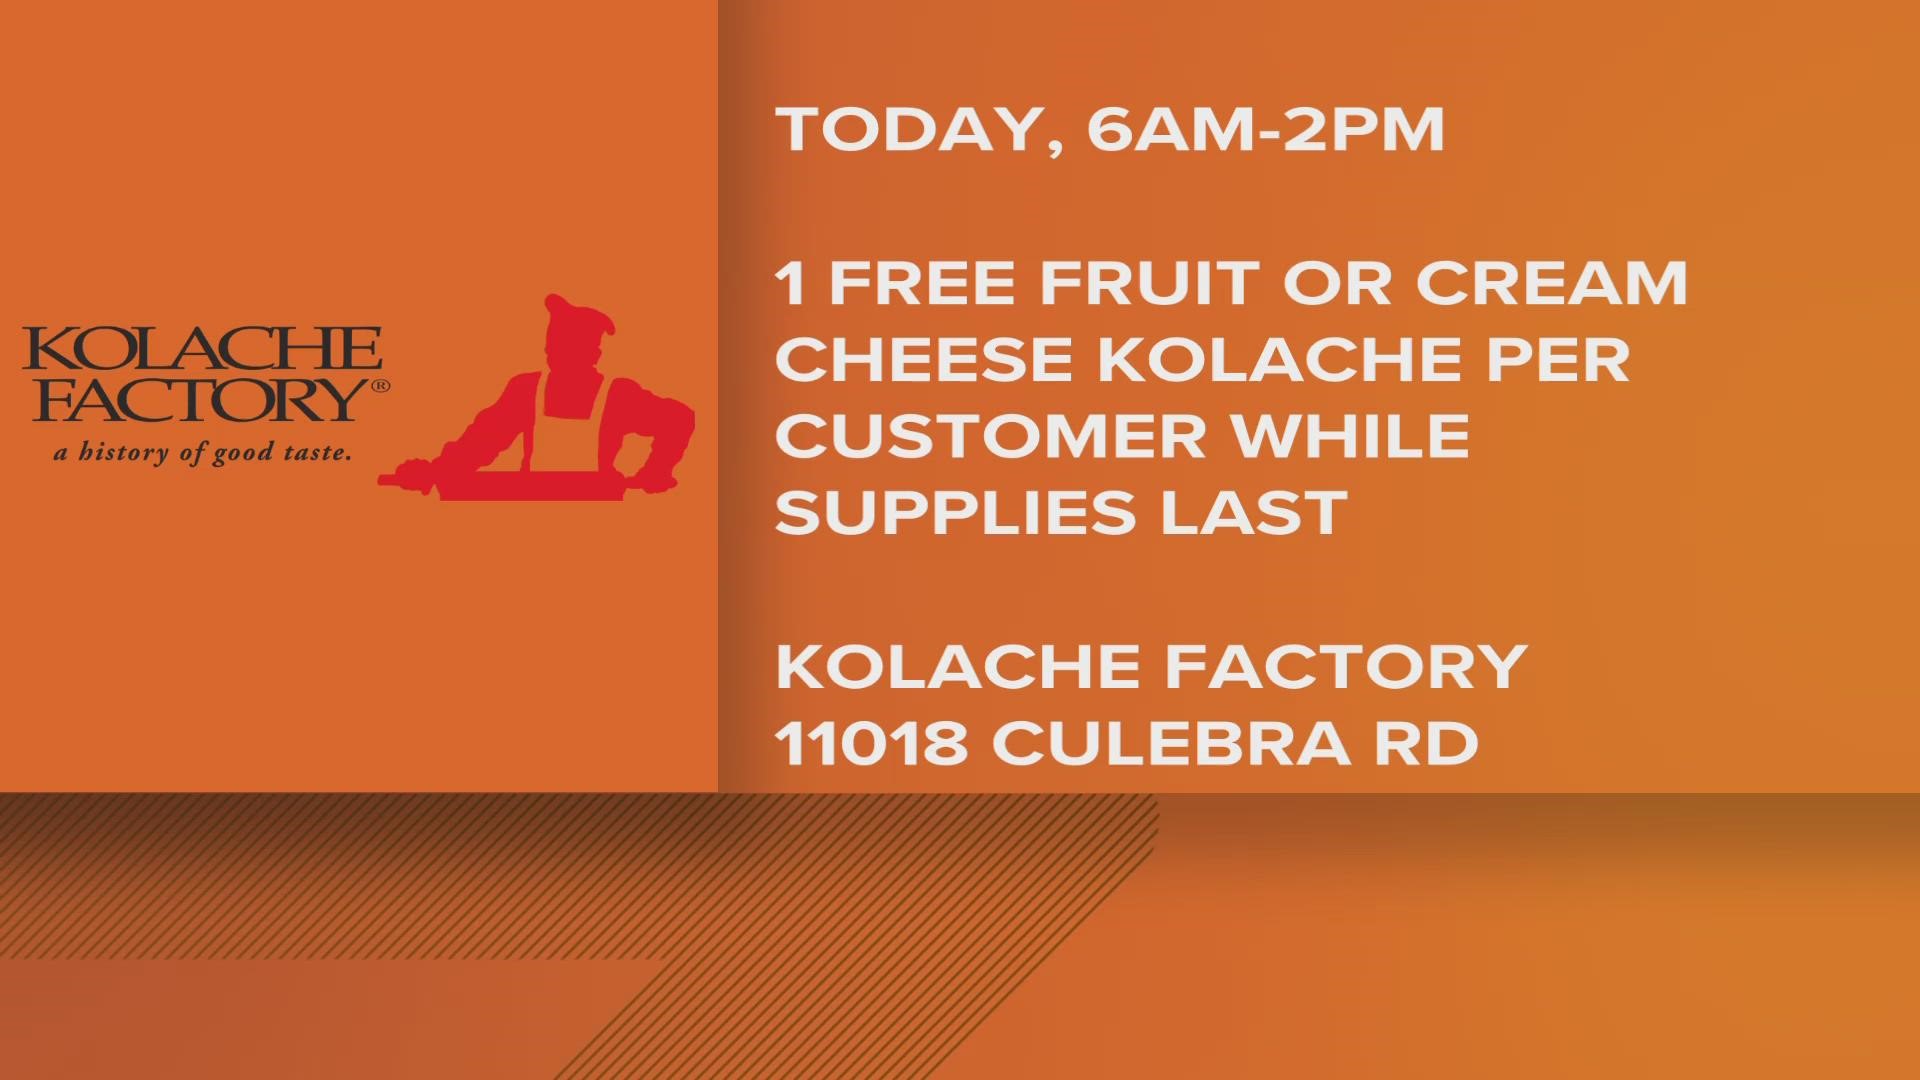 The Kolache Factory located on Culebra Road is giving away free kolaches to celebrate.